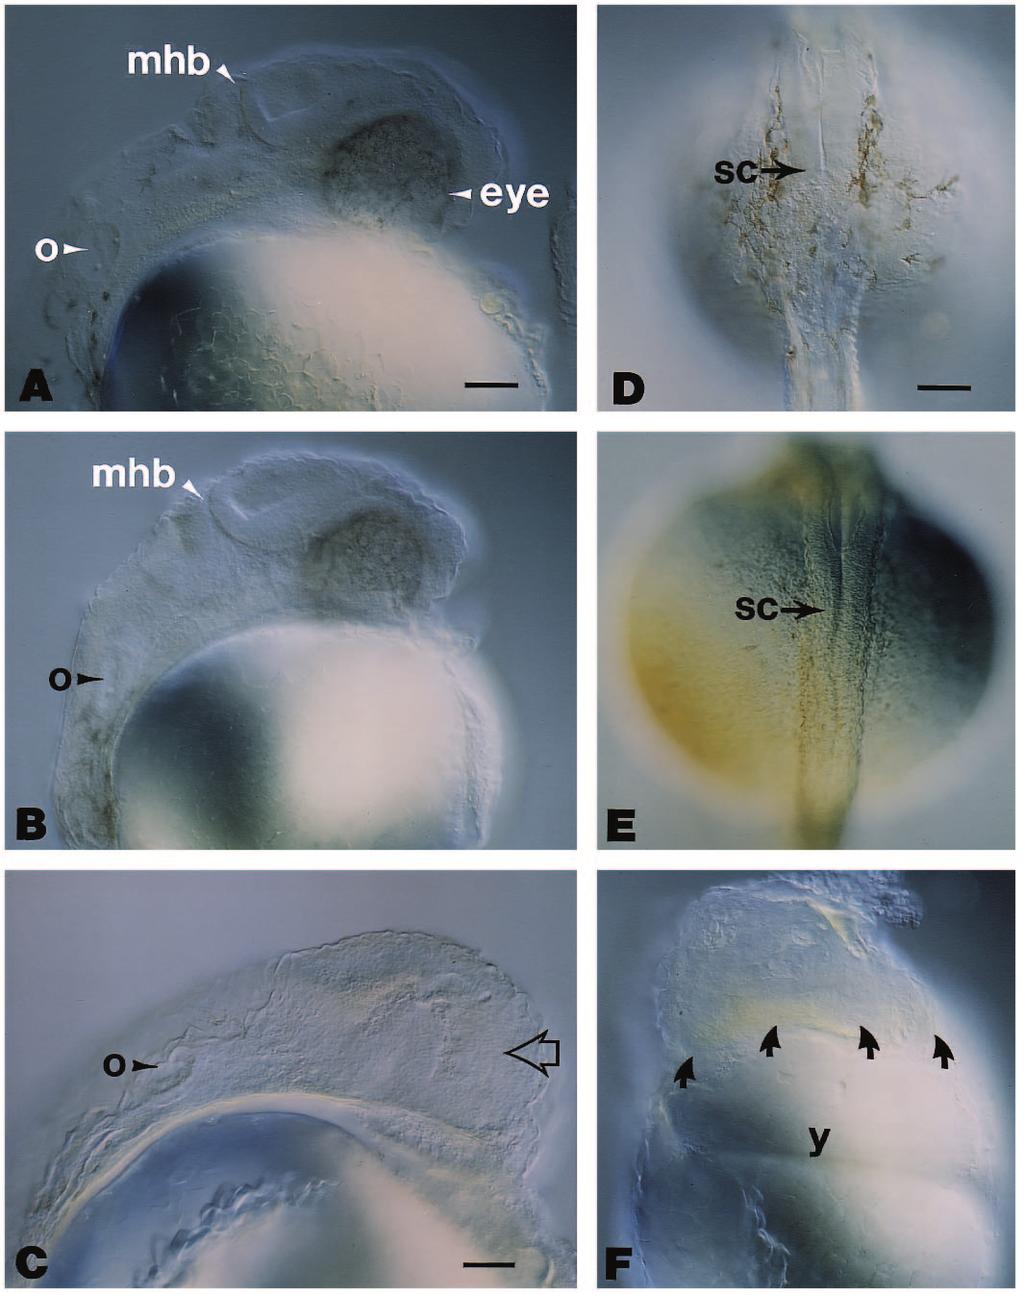 wnt8 and wnt8b expression in zebrafish embryos 1793 wnt8 or wnt8b would affect early zebrafish development.